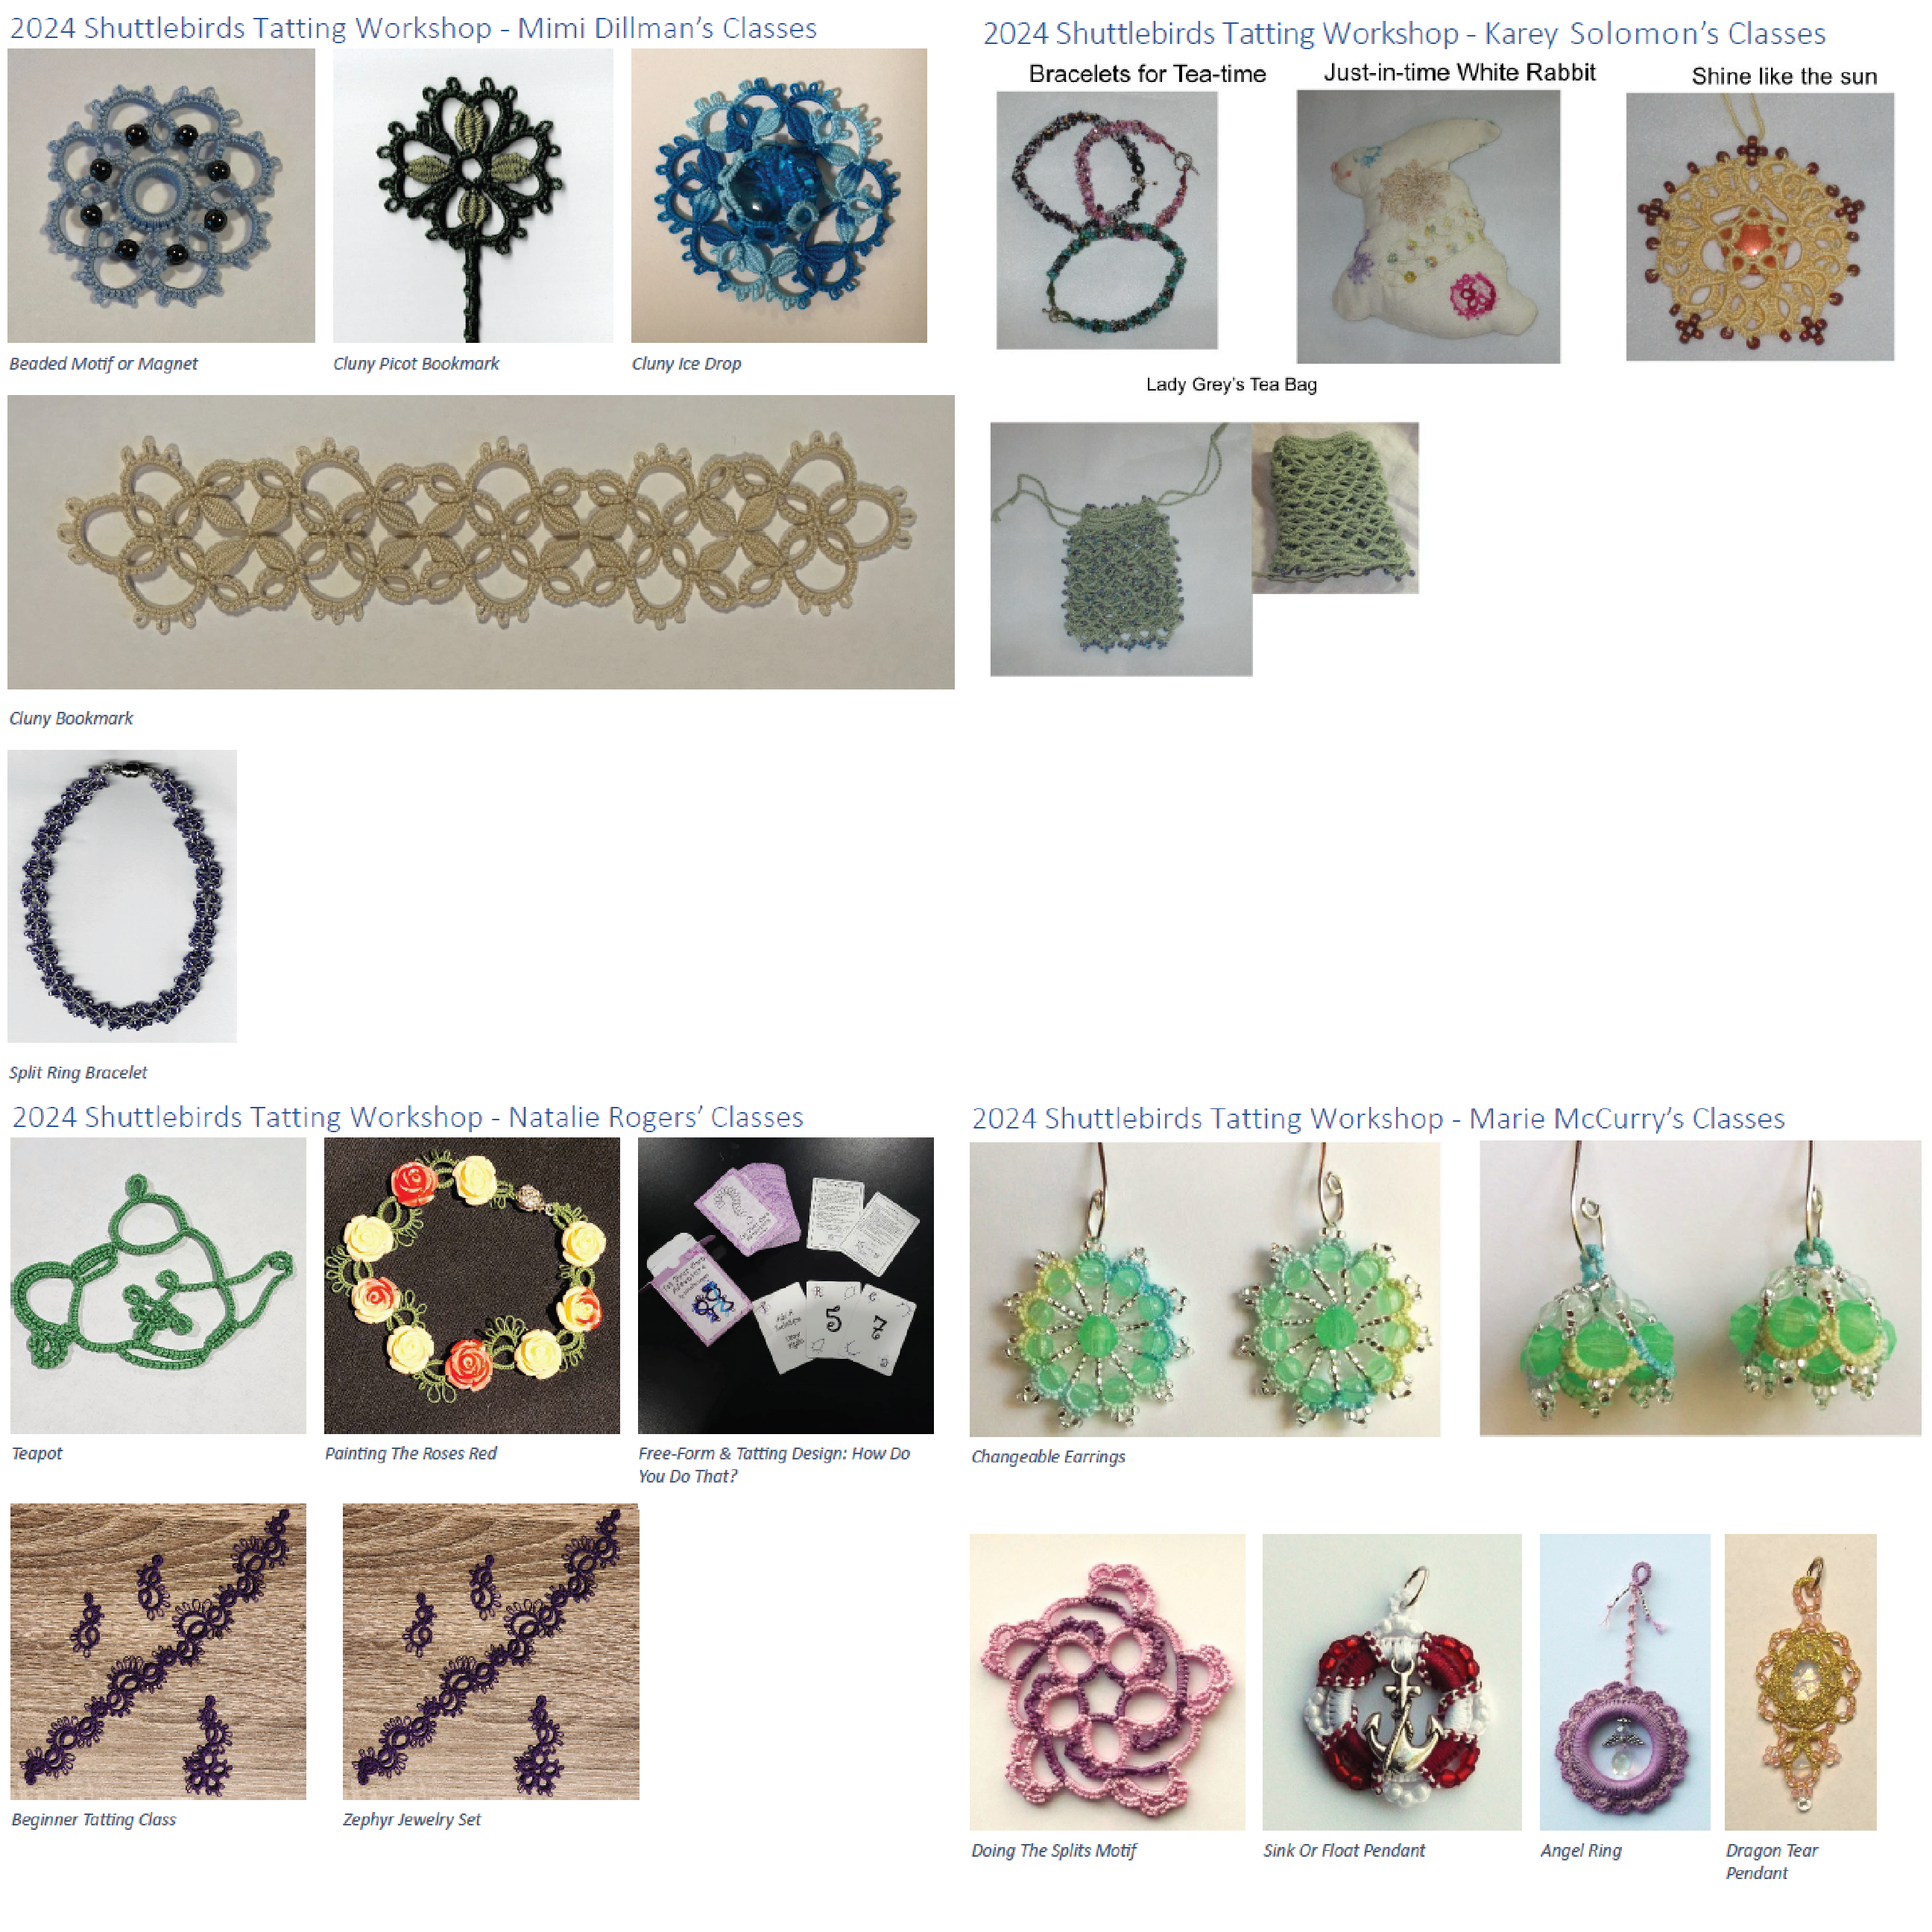 Pictures of each tatting class offered sorted by teacher